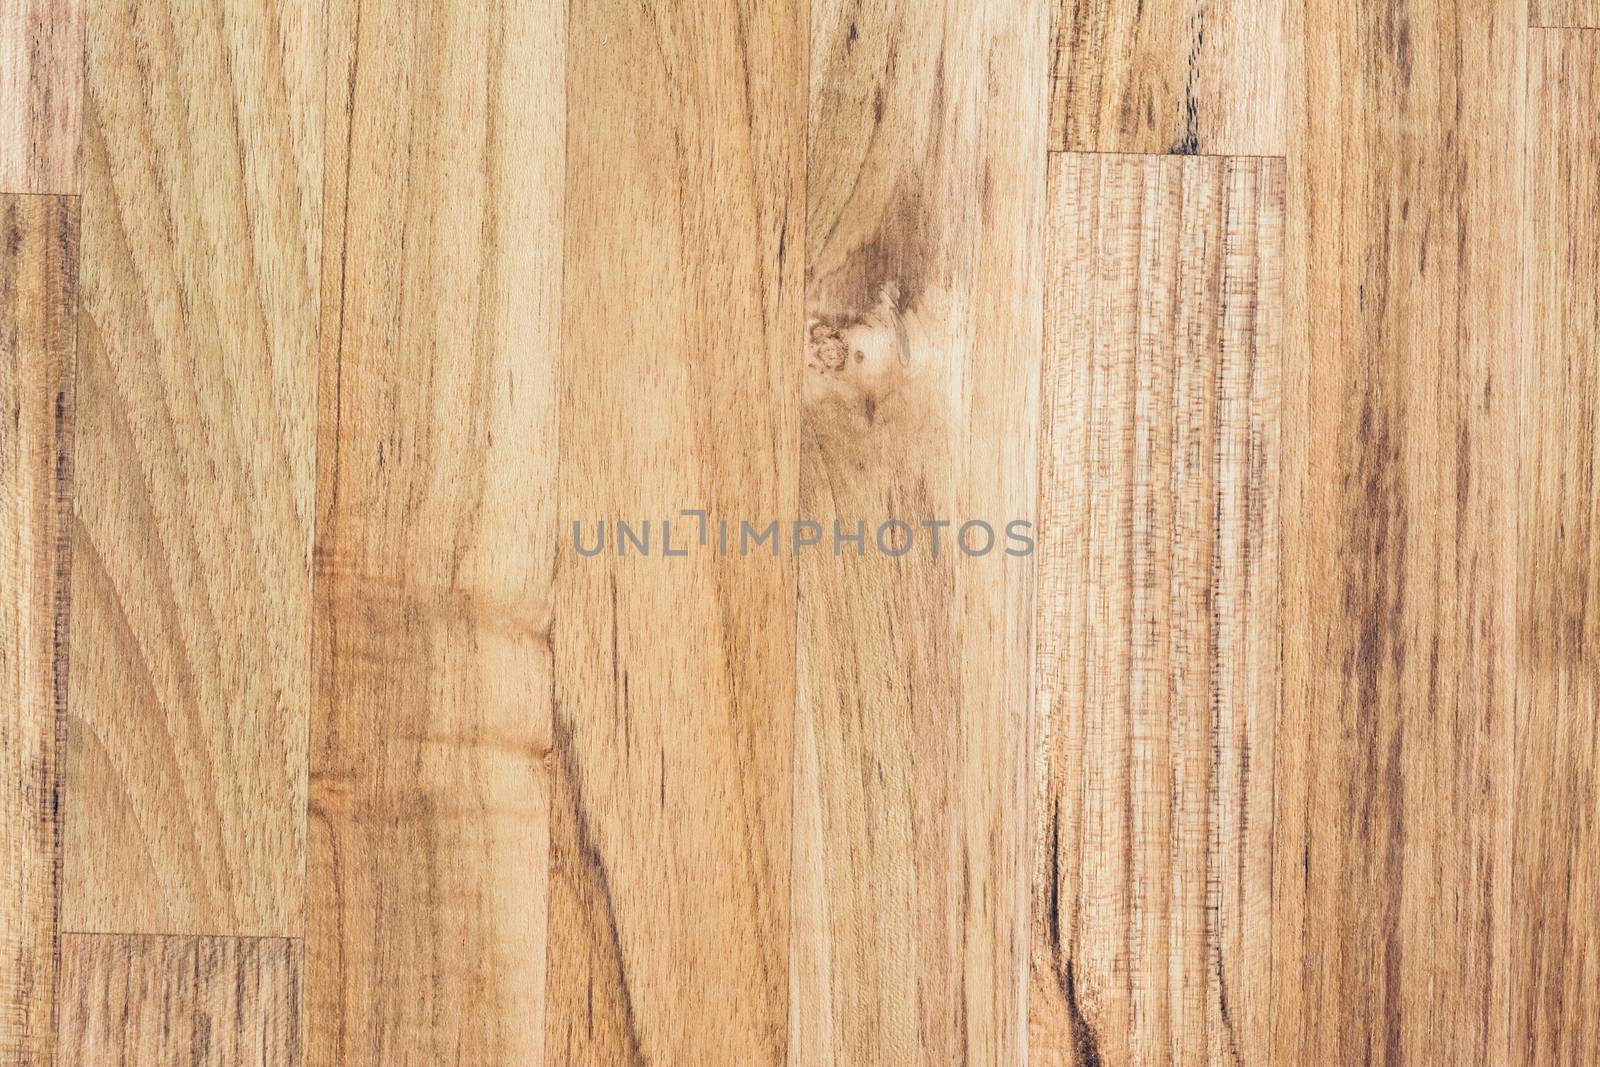 Aged wooden textured background with good detail.